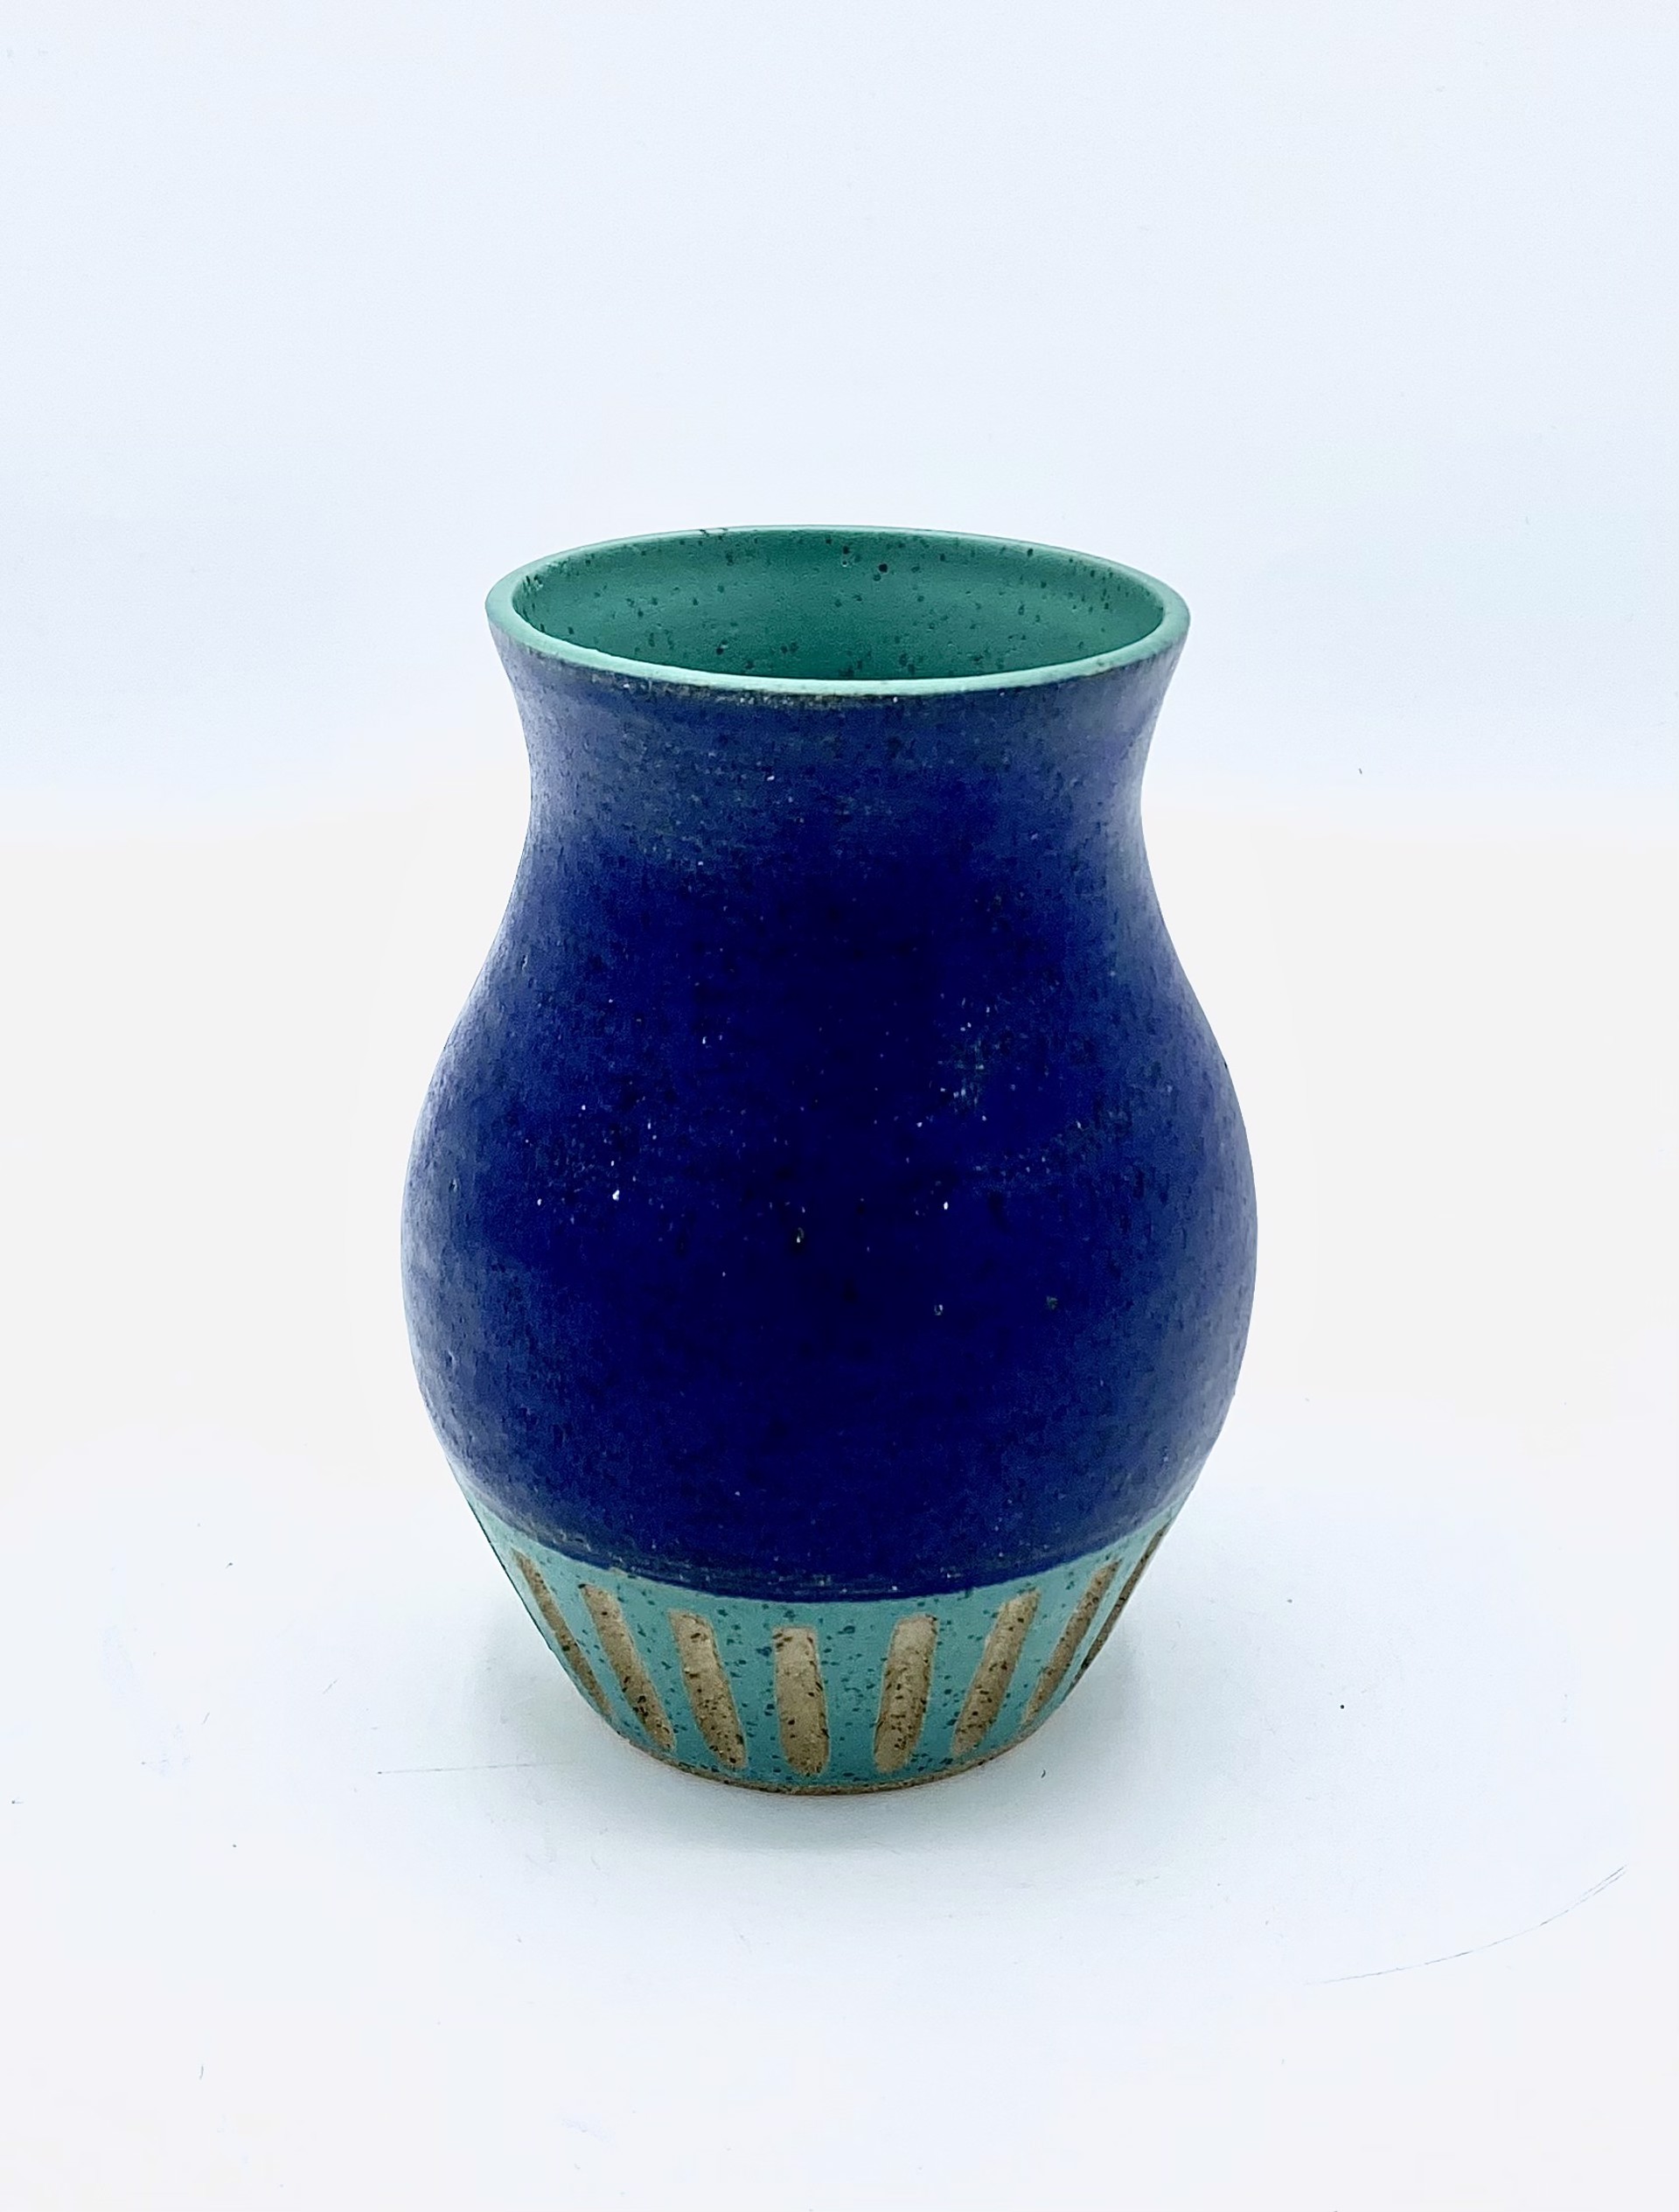 Purple Crystal and Teal Glazed Carved Vase by Messy Pots Pottery